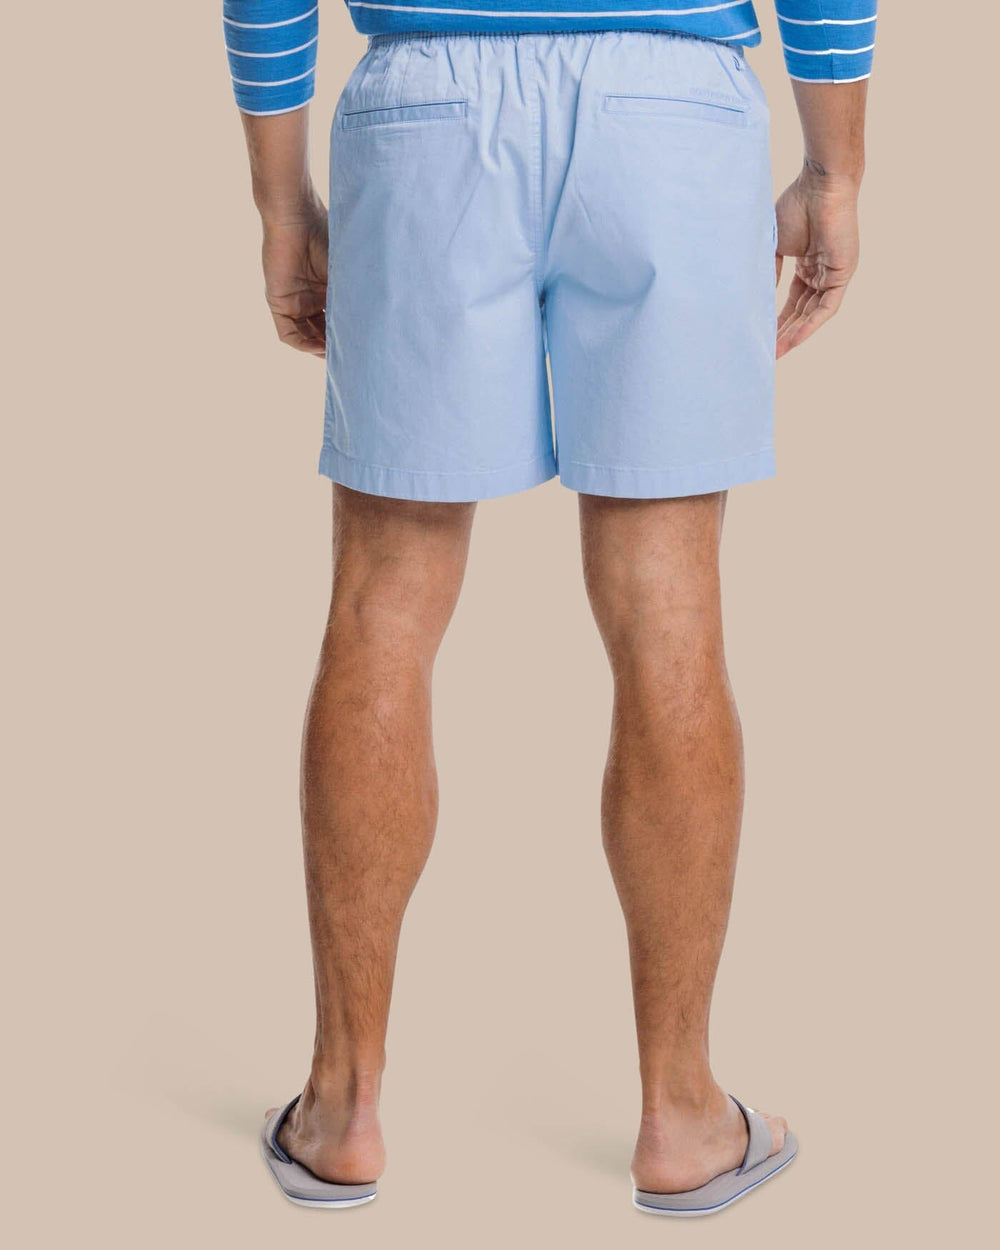 The back view of the Southern Tide Sun Farer 6 Inch Short by Southern Tide - Clearwater Blue